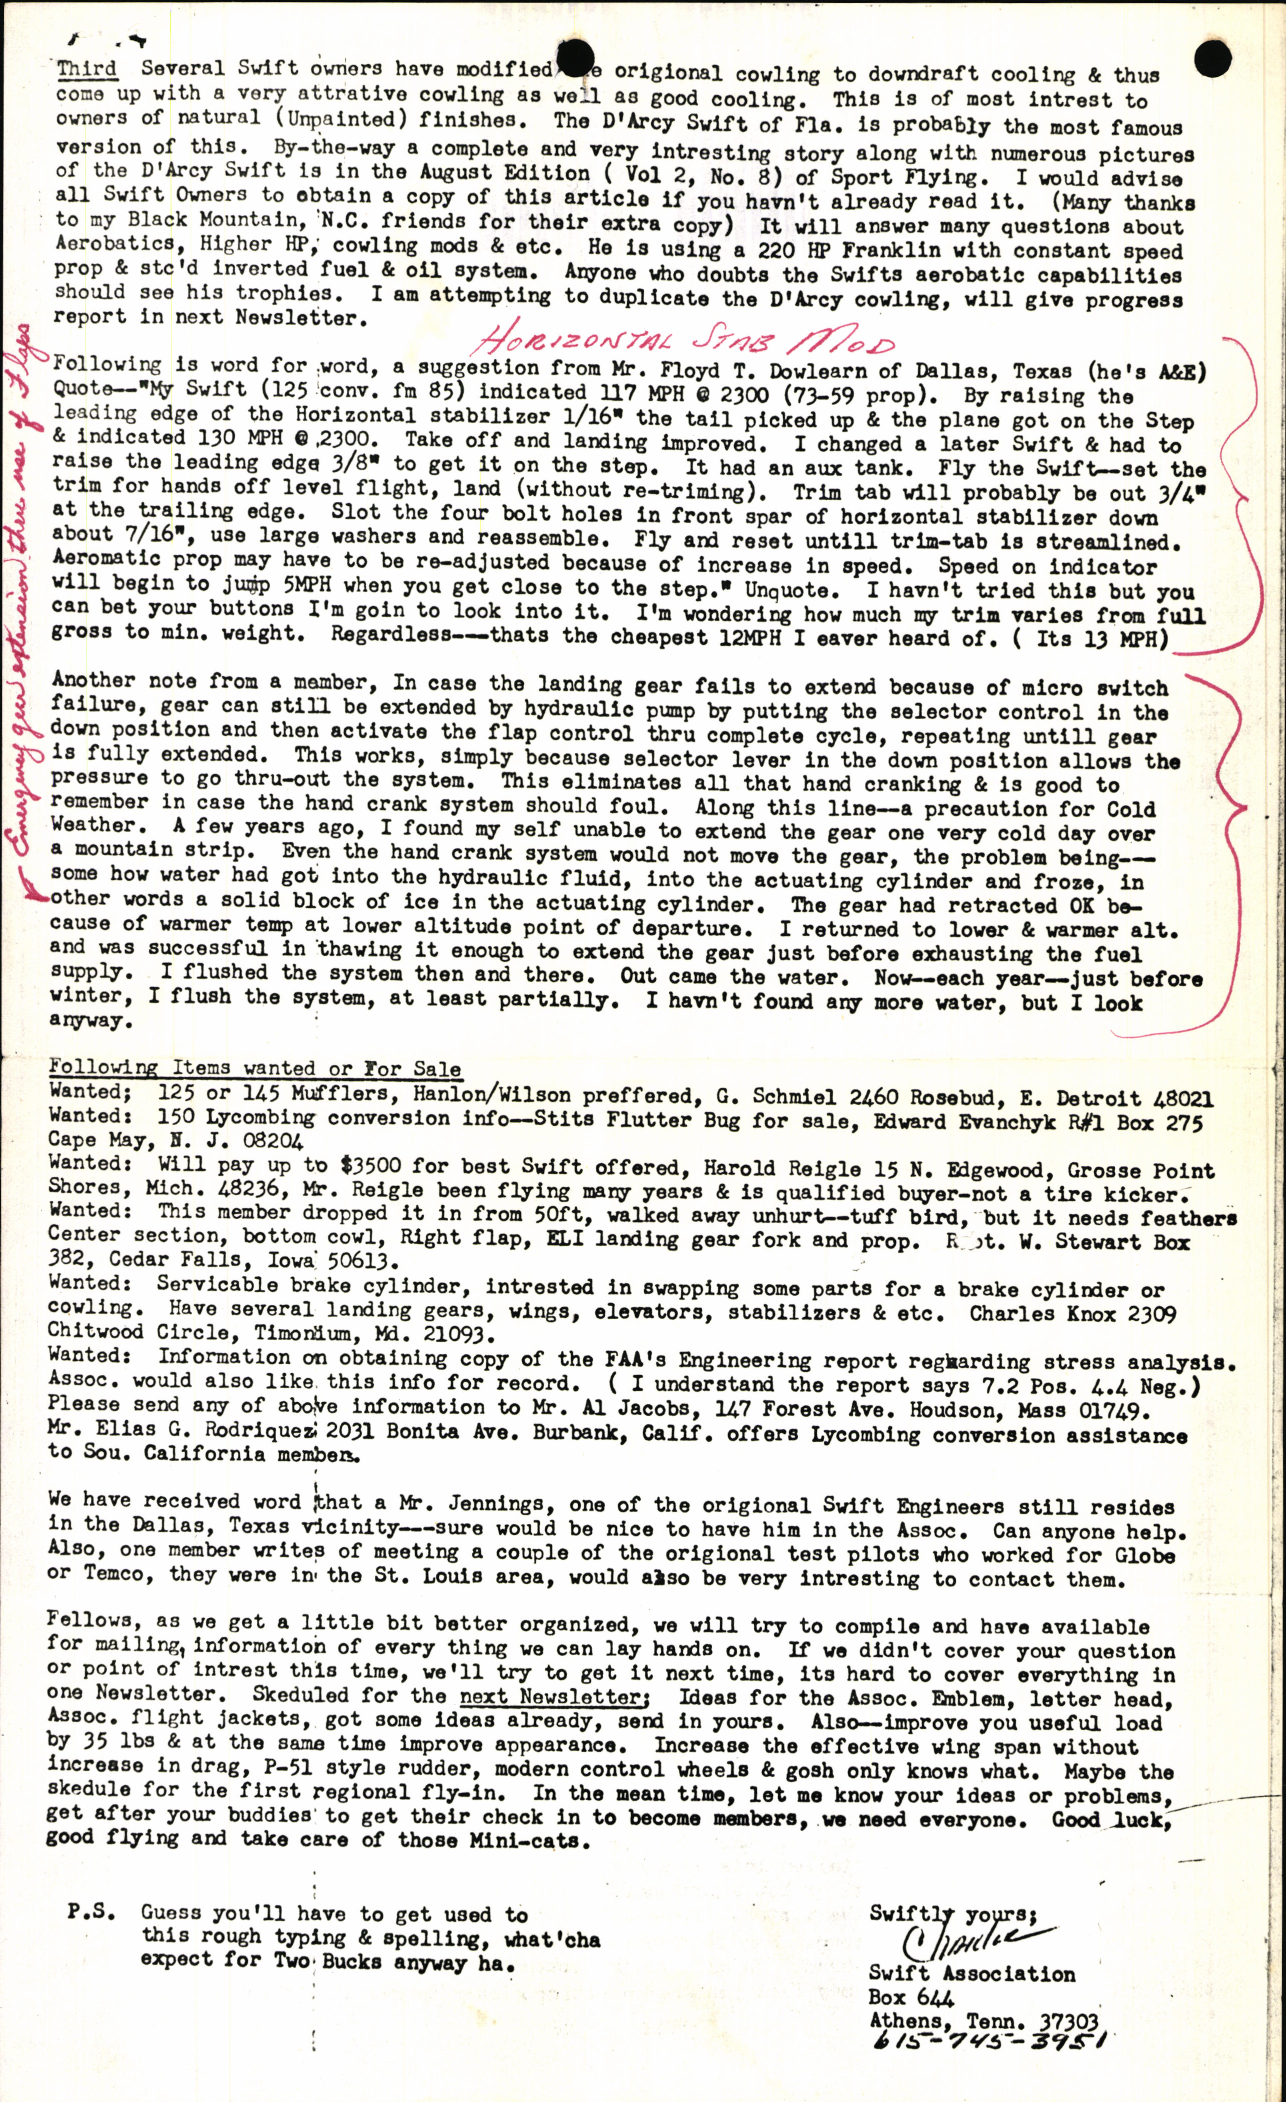 Sample page 2 from AirCorps Library document: December 1968